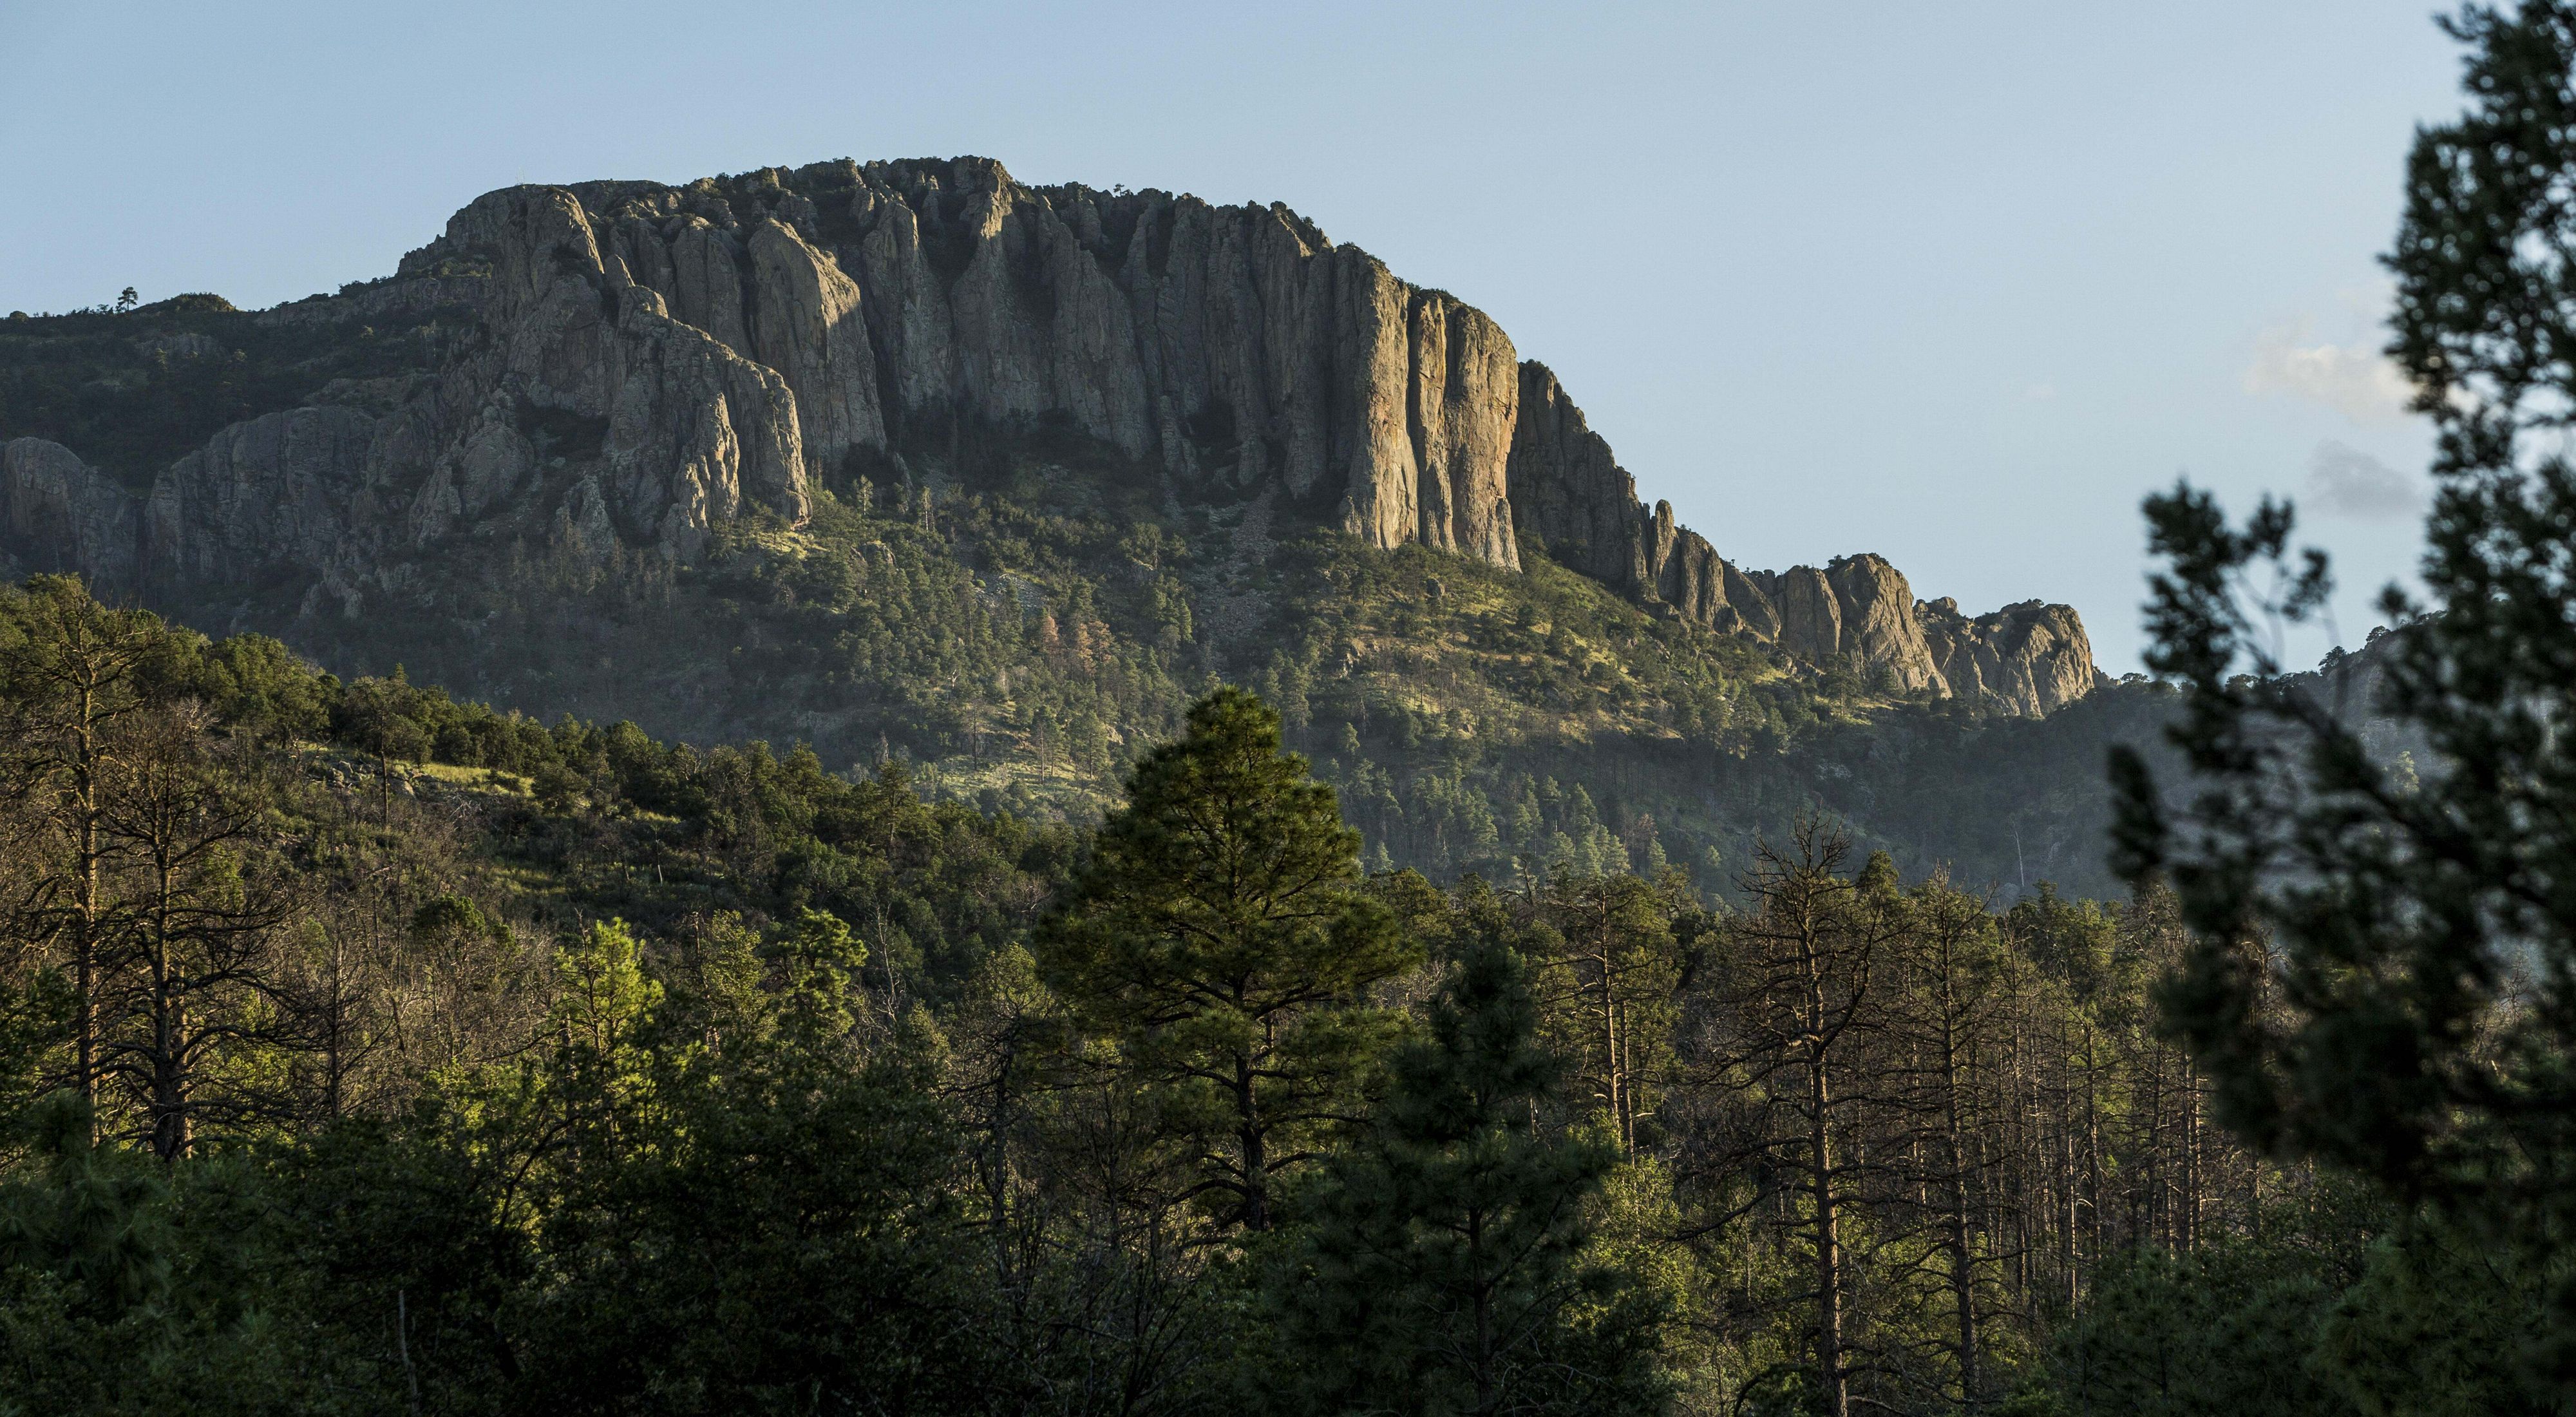 Rocky outcrops and mountains shoot up towards the sky behind a pine forest.